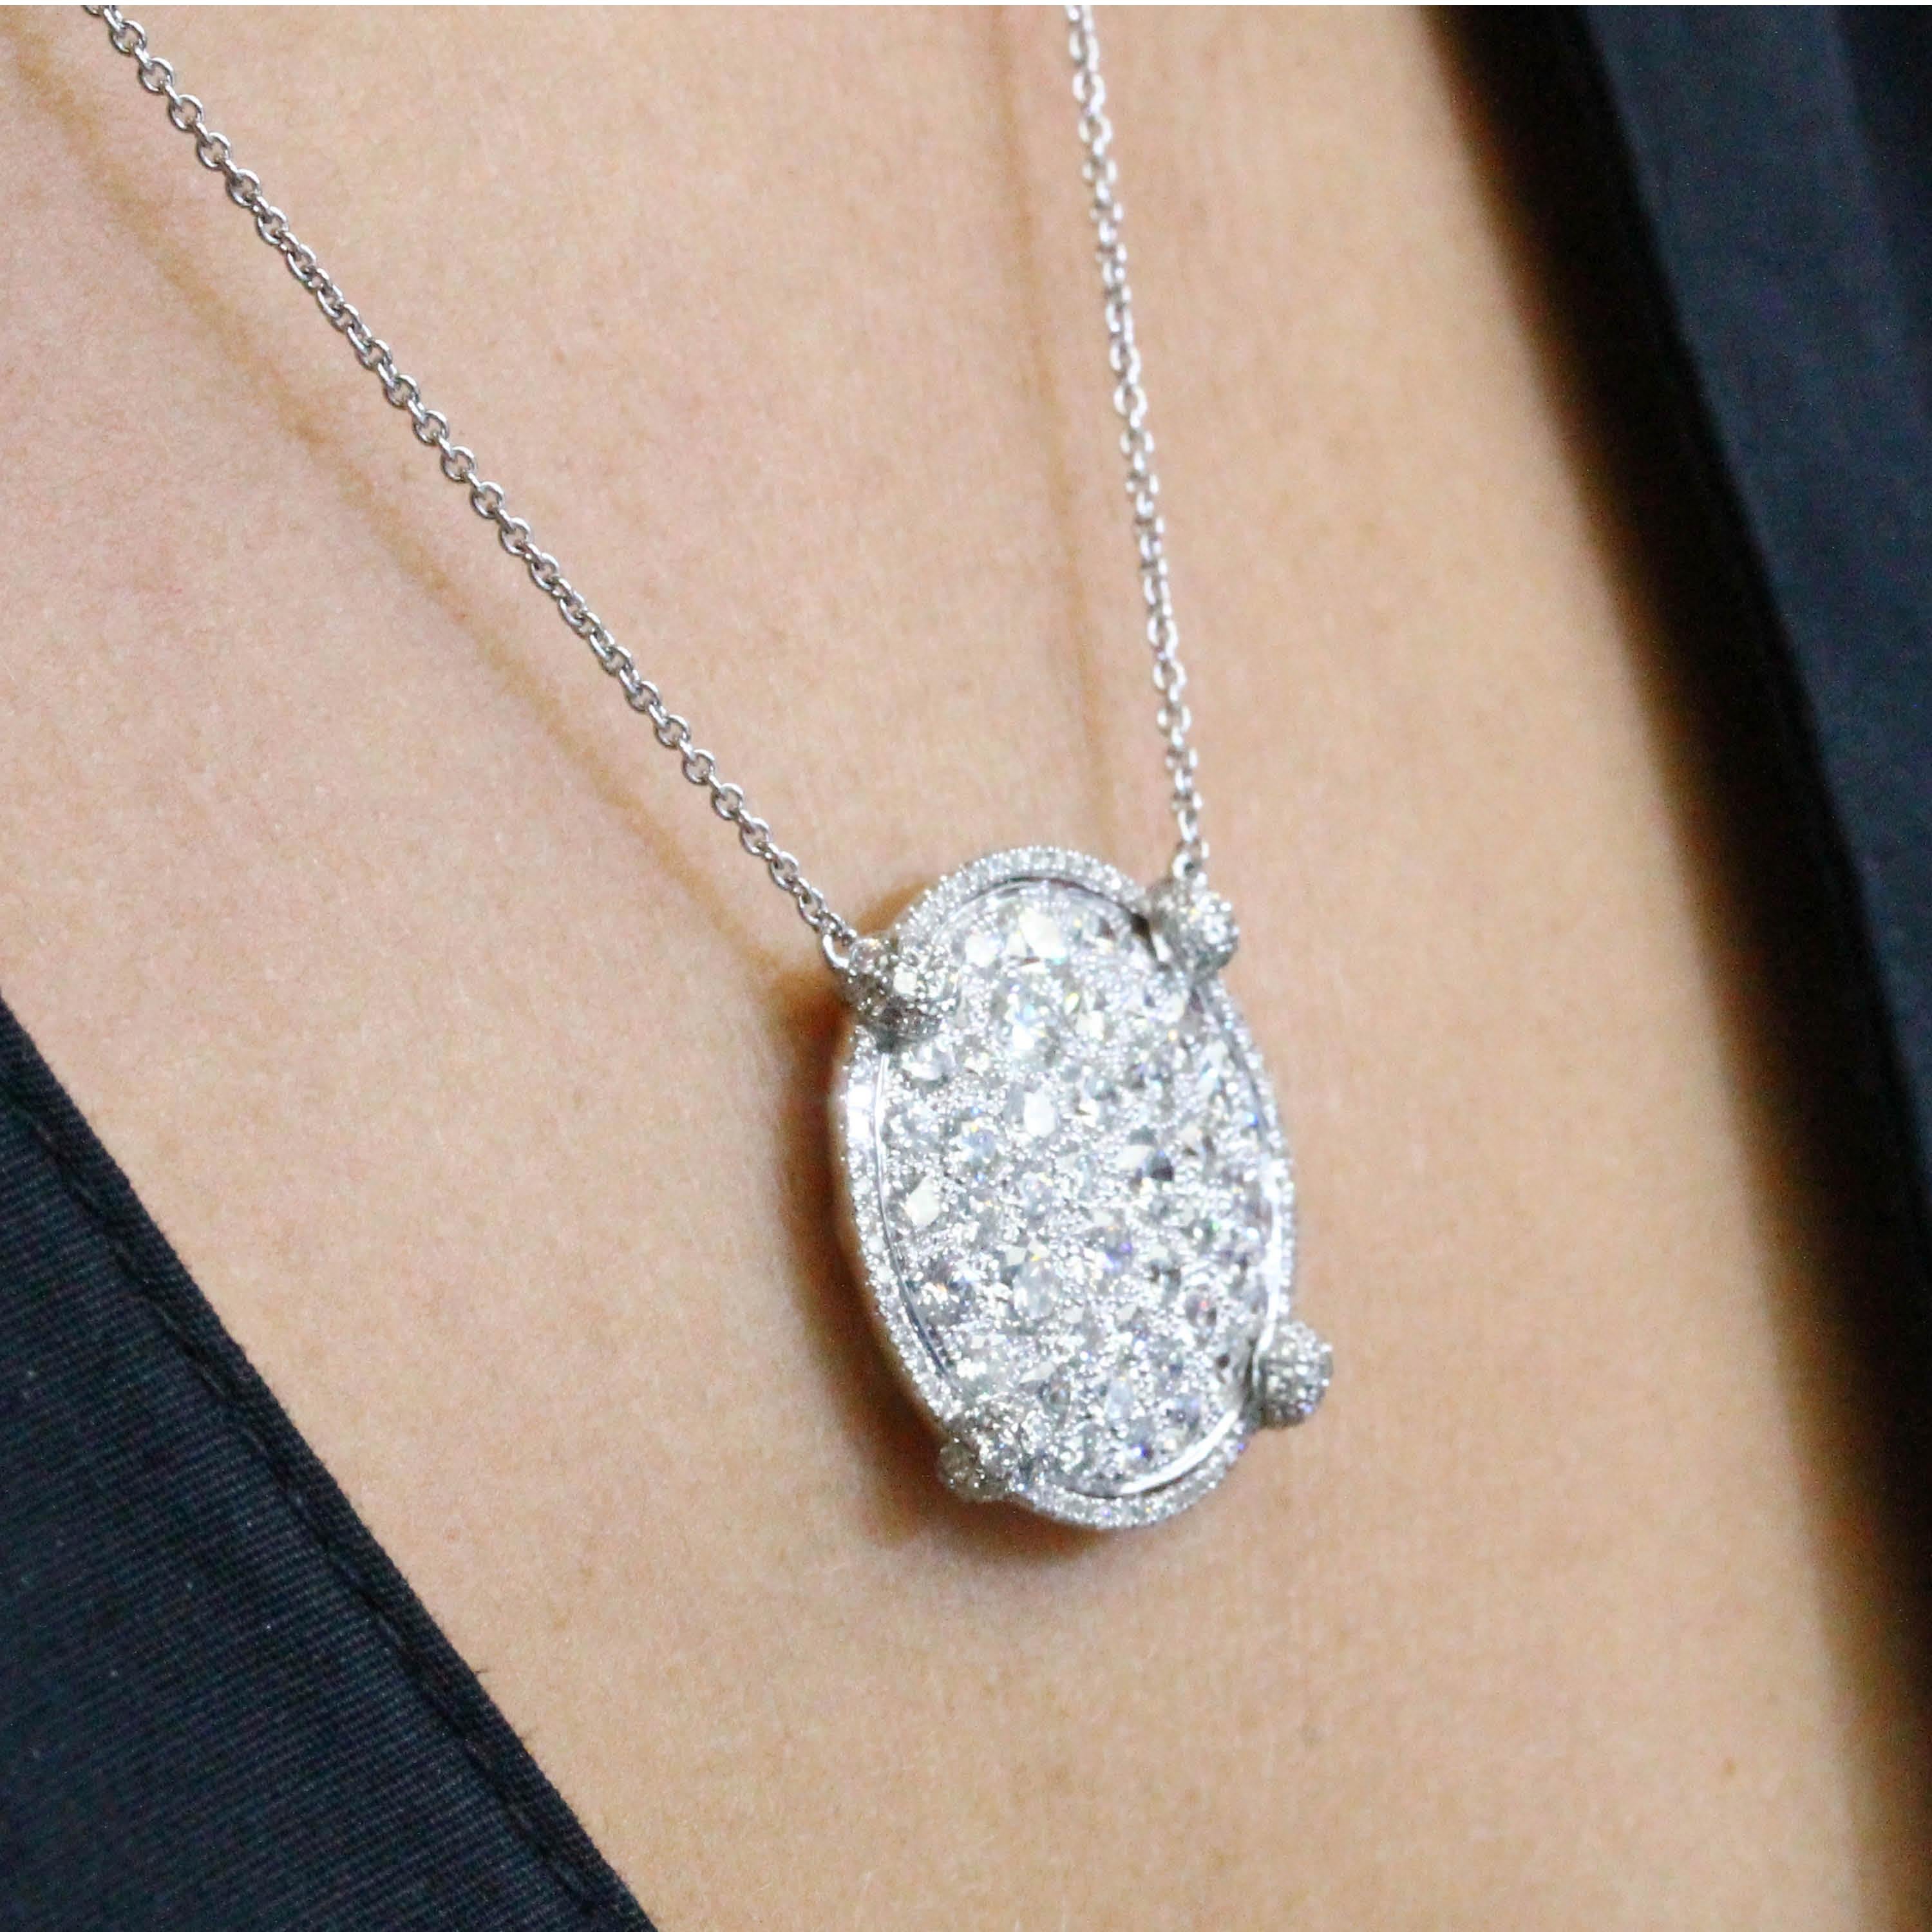 18 Karat White Gold Round Pave Diamond Fashion Necklace 3.26 Carat In New Condition For Sale In Great Neck, NY